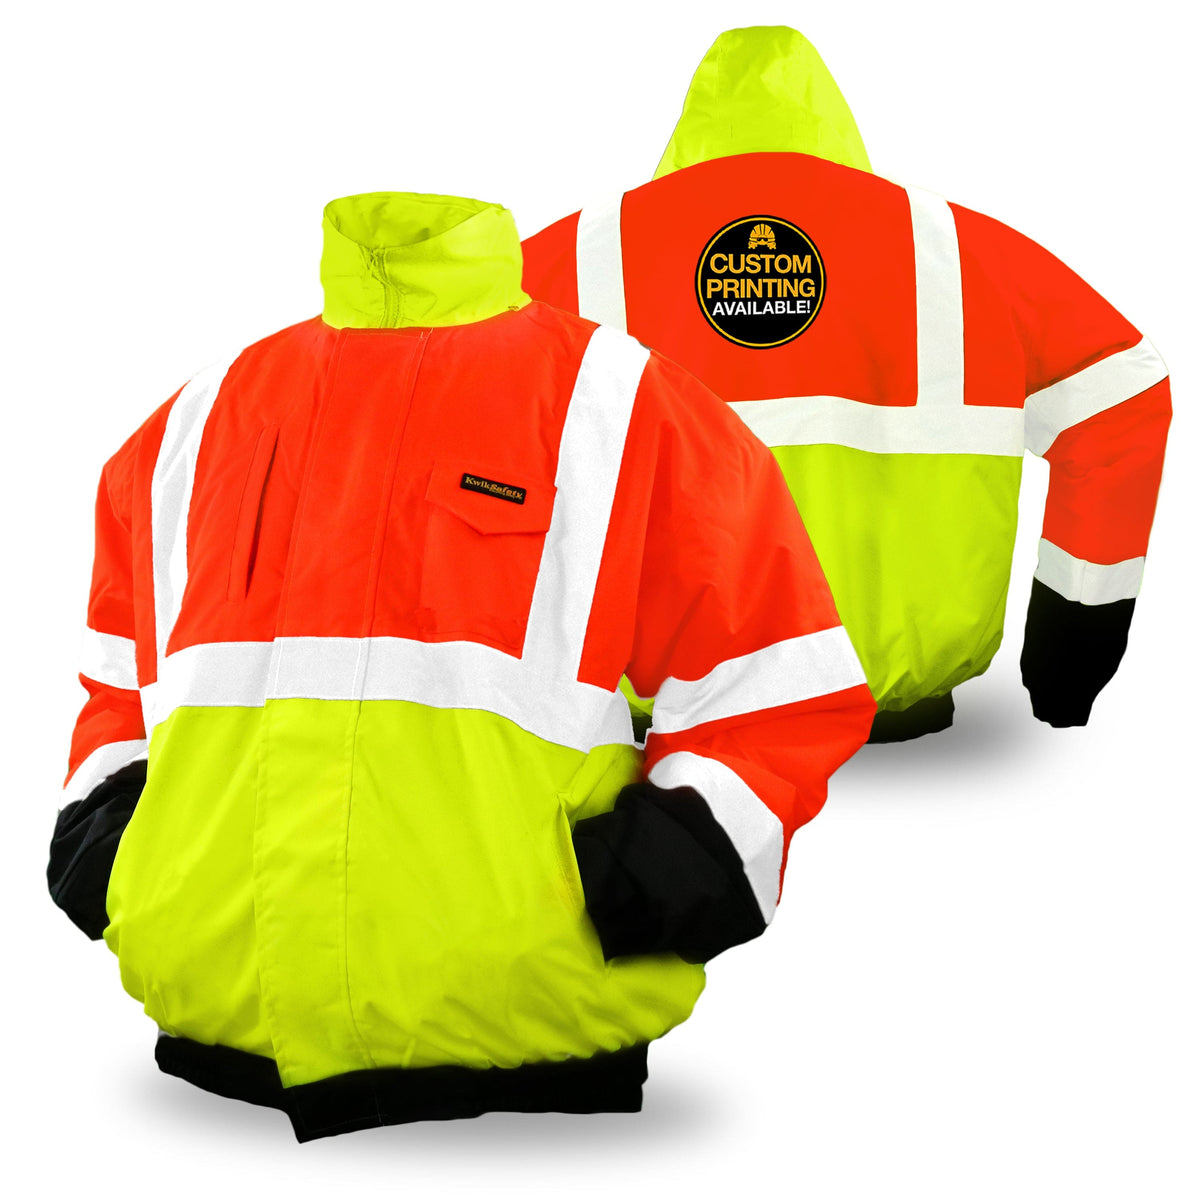 KT Blue Safety Reflective Jacket with 1 Inch Tape (Pack of 10)